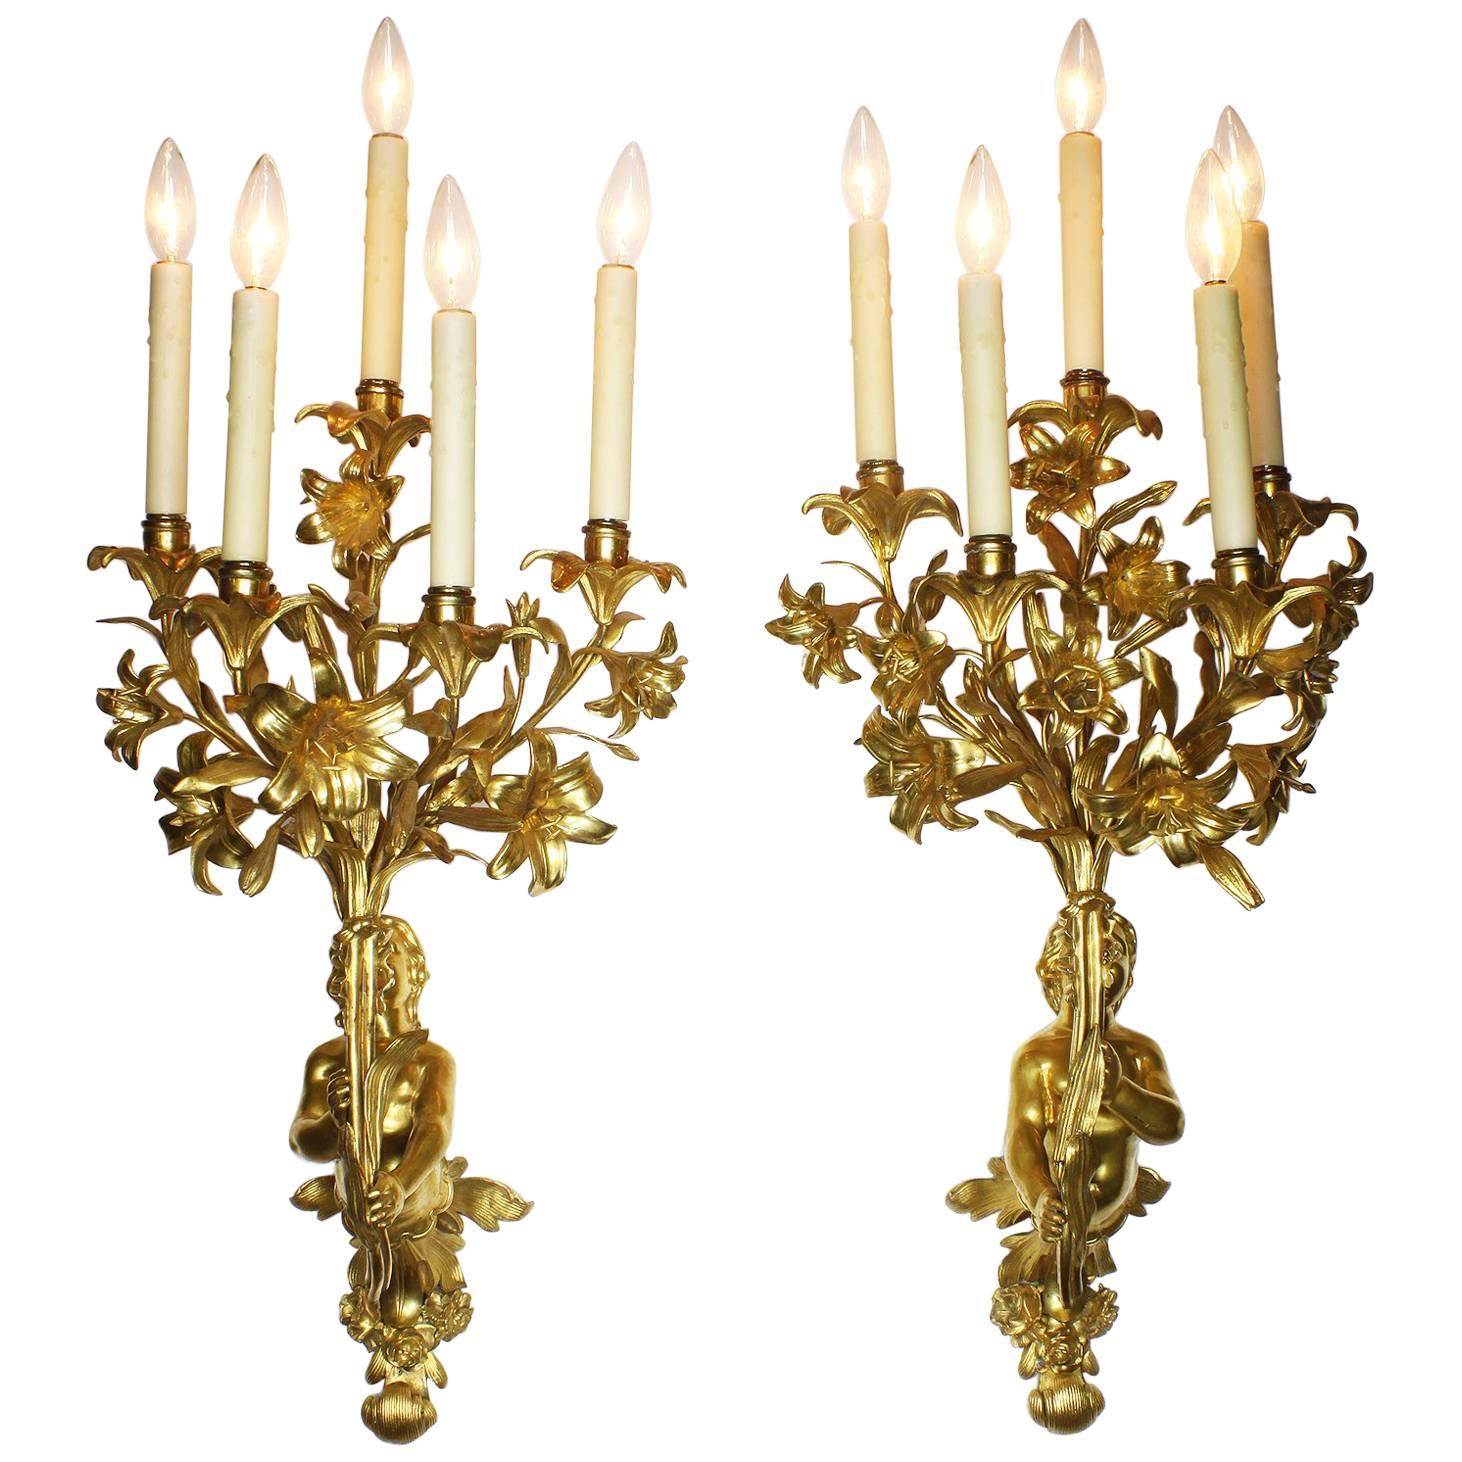 Pair of French 19th Century Neoclassical Style Gilt Bronze Putto Wall Lights